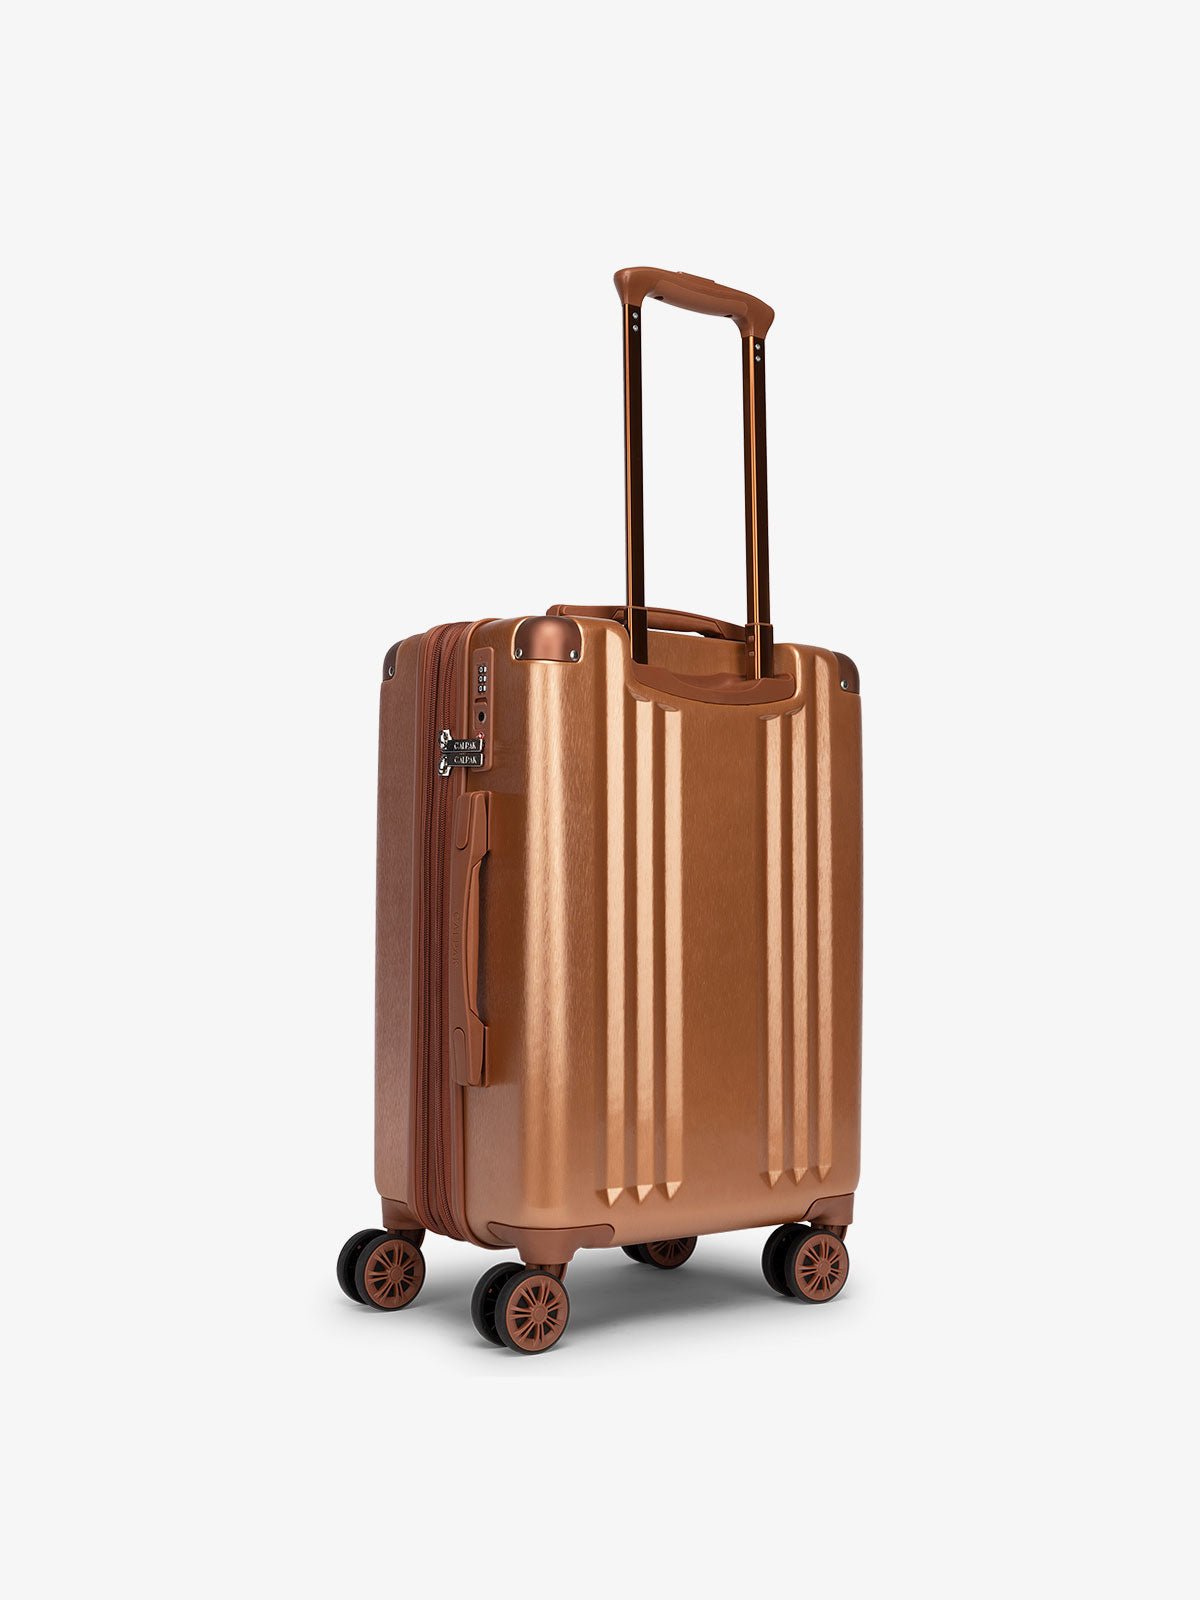 CALPAK Ambeur carry-on luggage featuring TSA lock, 360 spinner wheels, and expanded top handle in copper